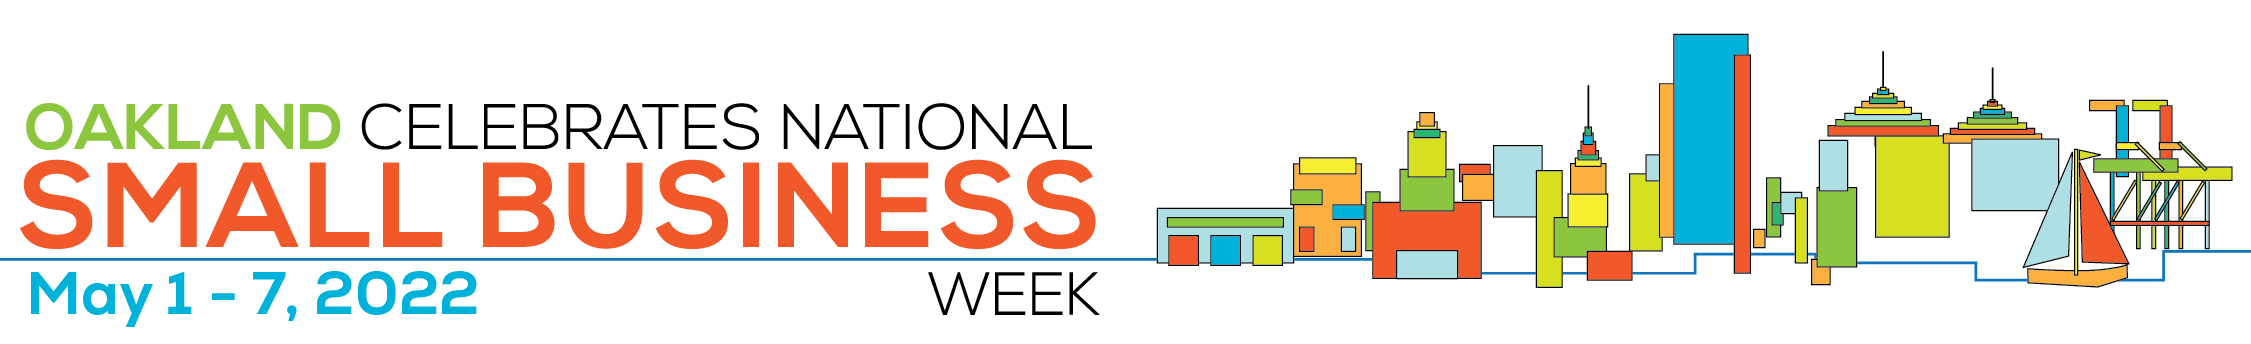 Small Business Week 2022 Image